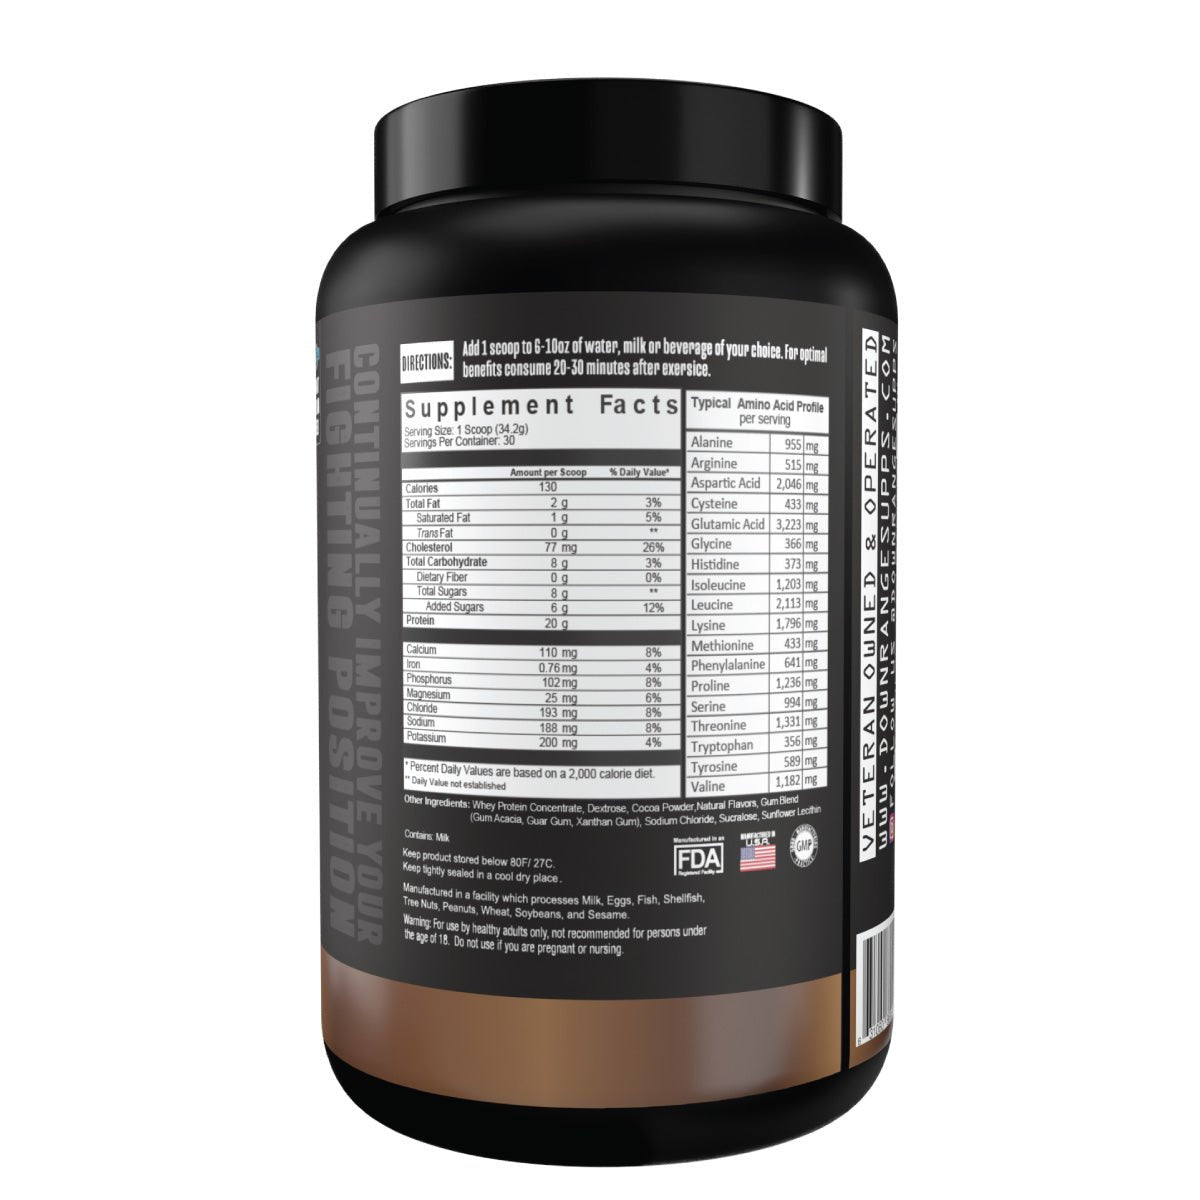 FIELD RECOVERY PROTEIN - DownRange Supplements